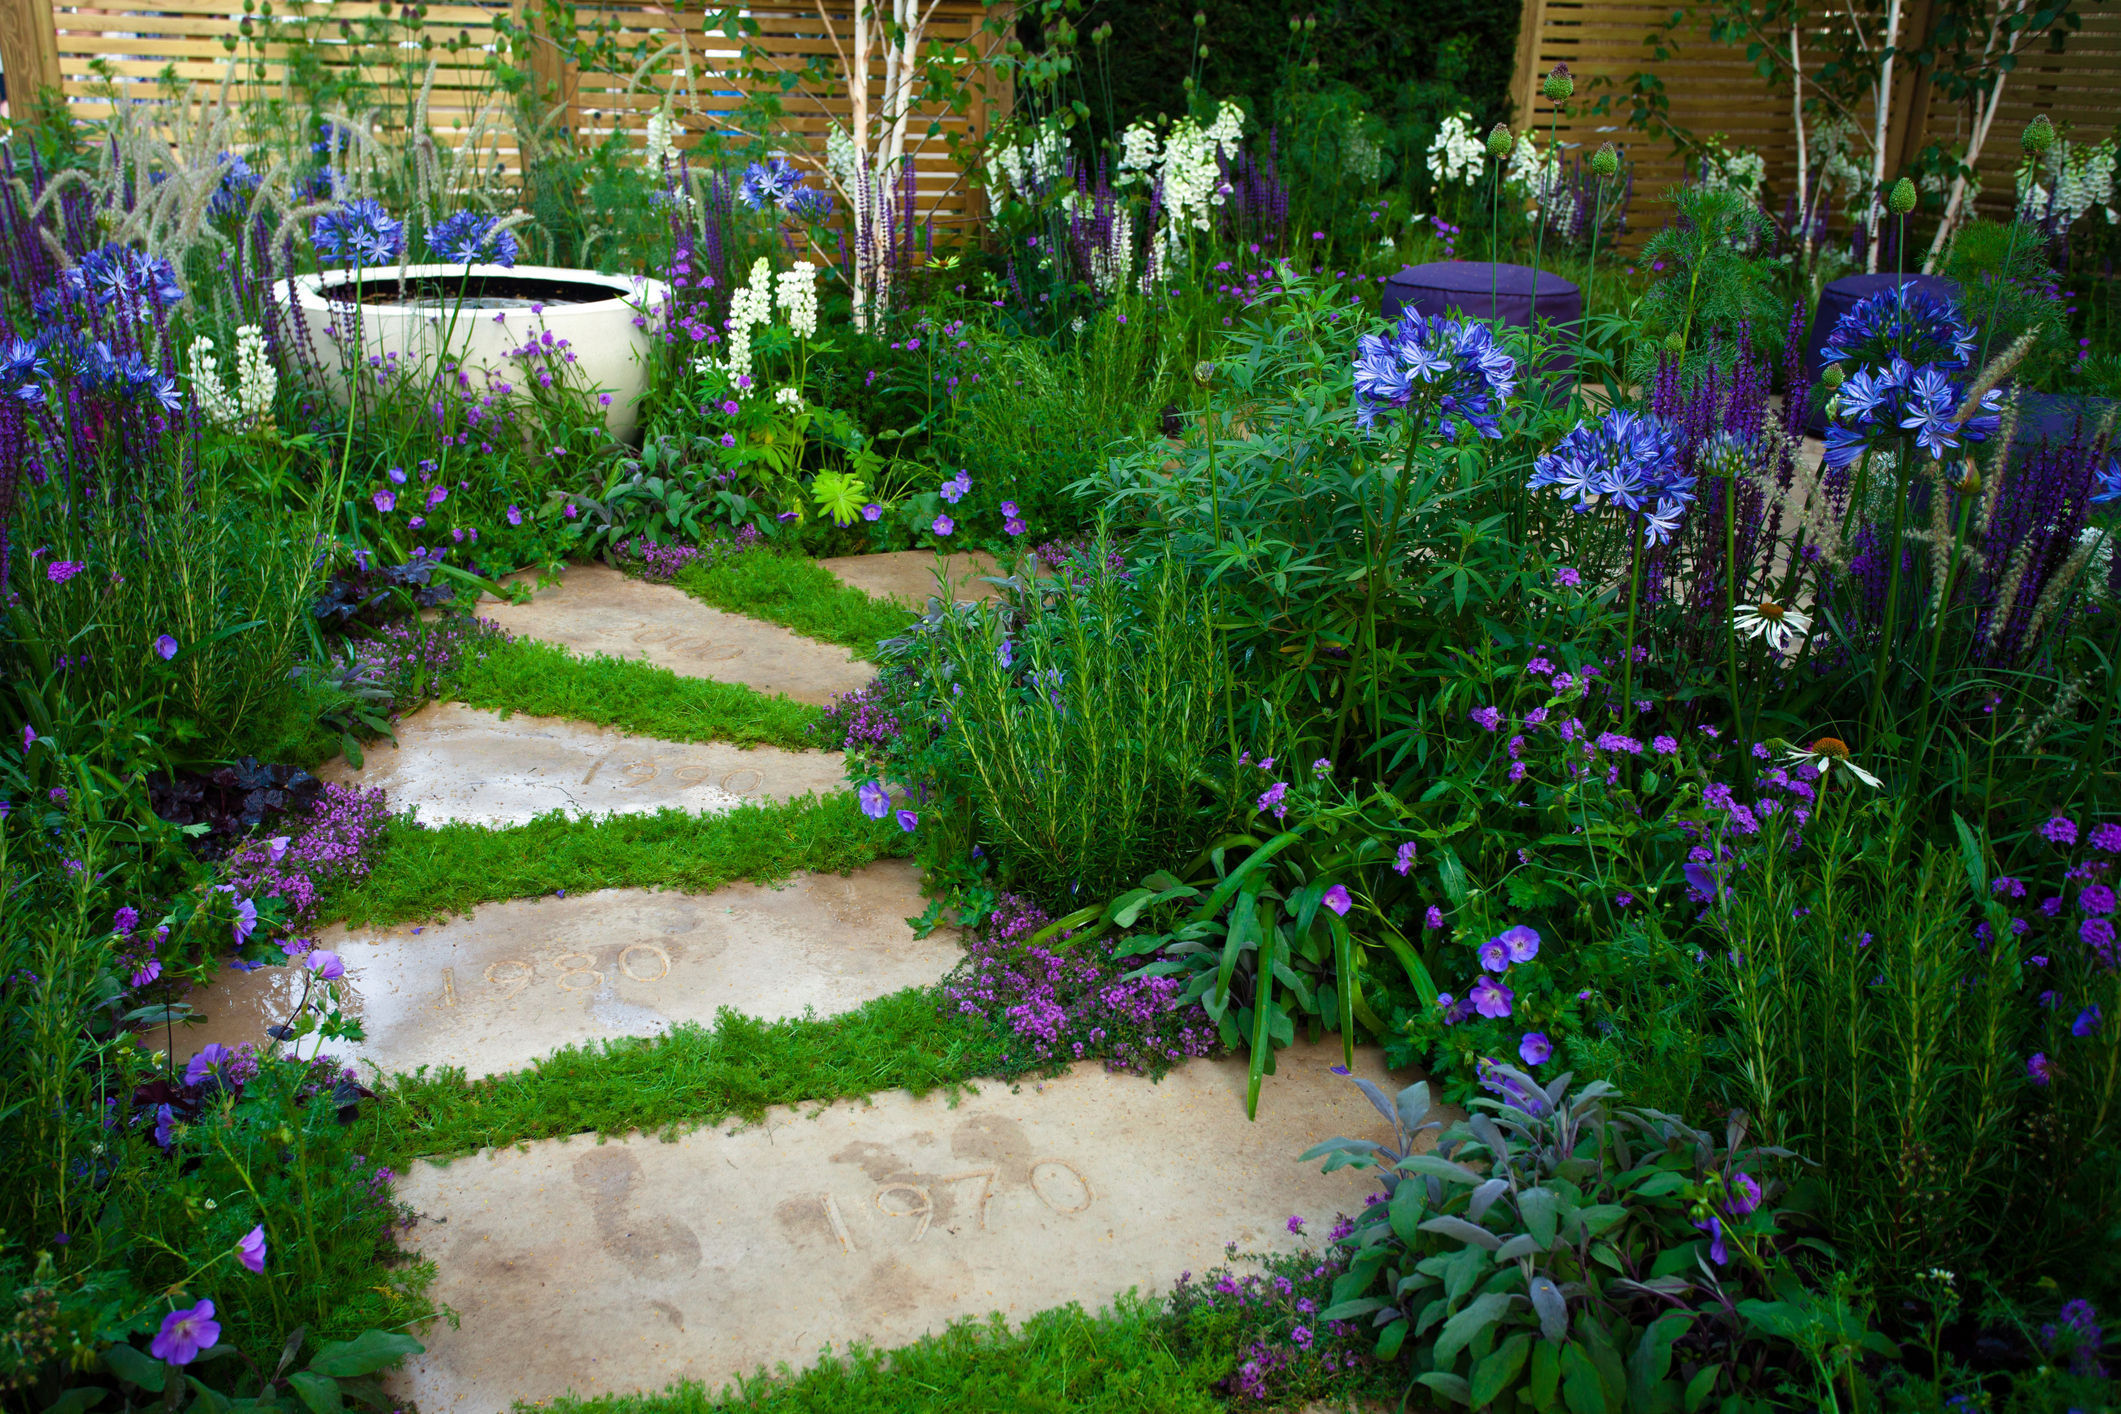 Is your garden path a step in the right direction?